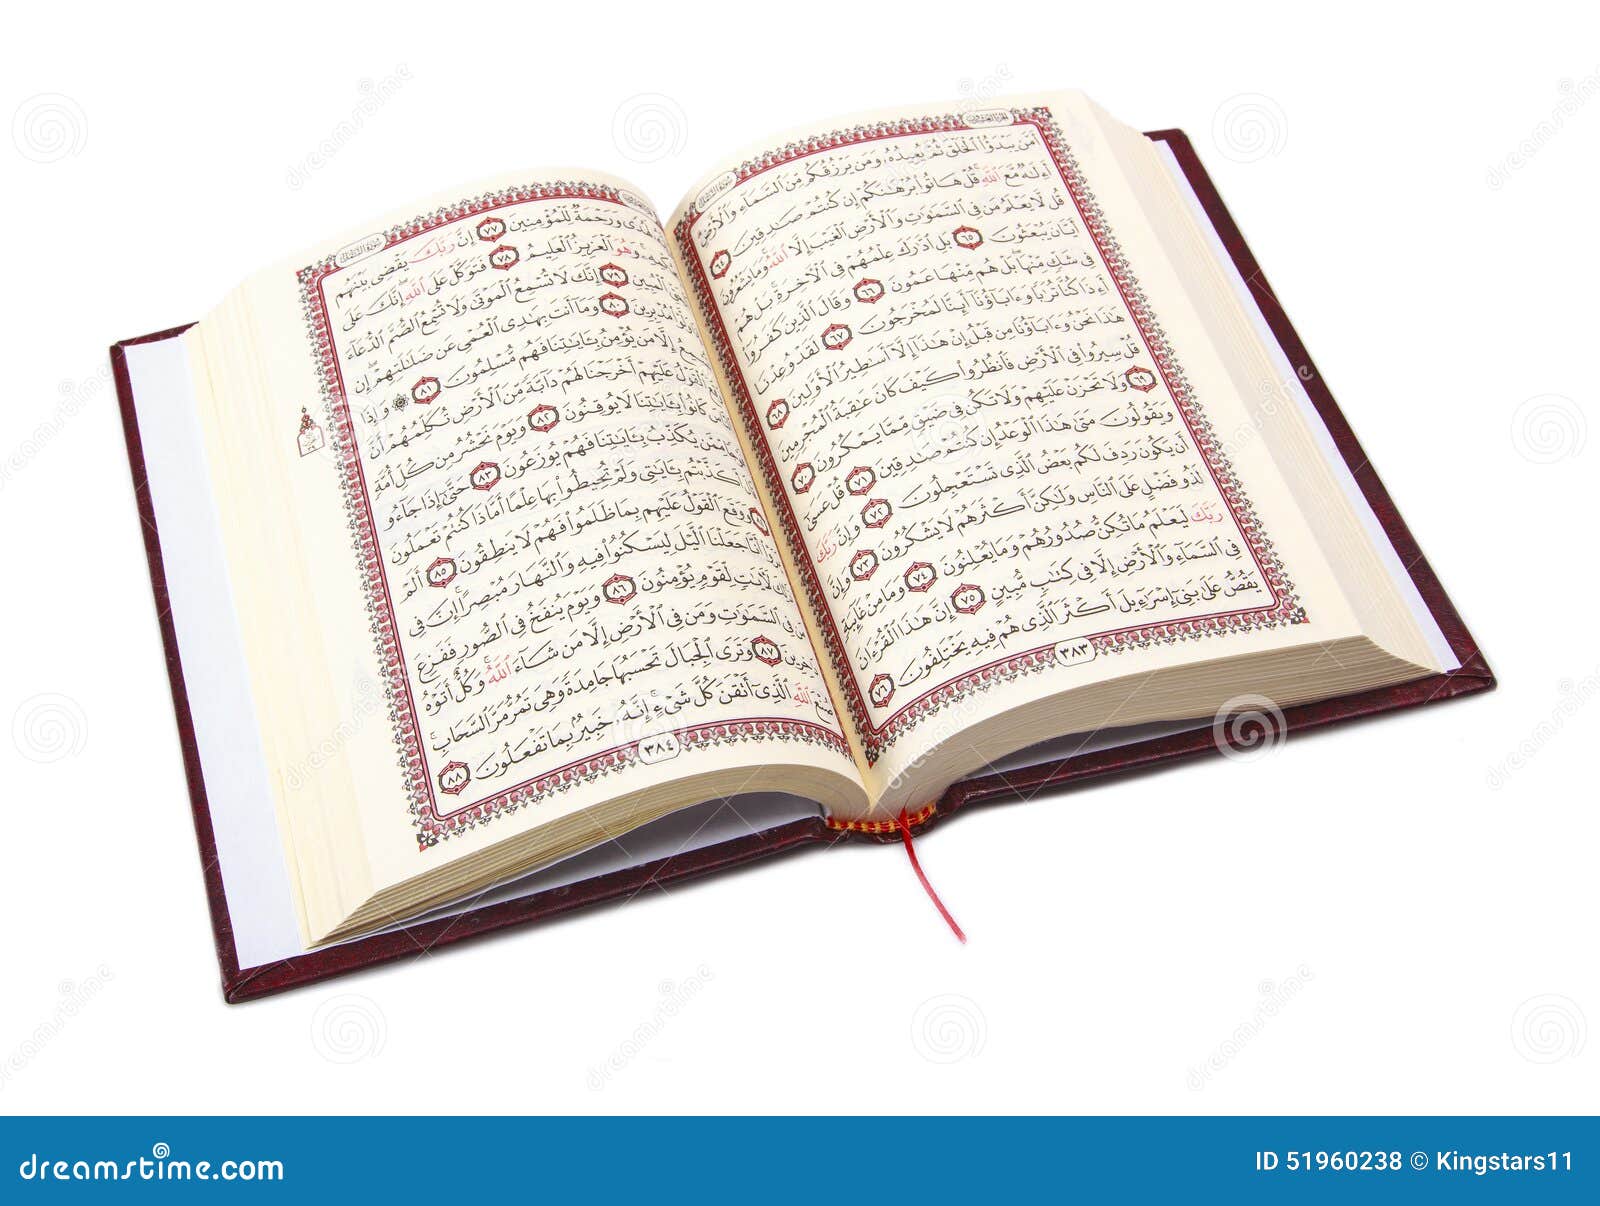 The Holly Book Quran Opened Book Stock Photo Image 51960238